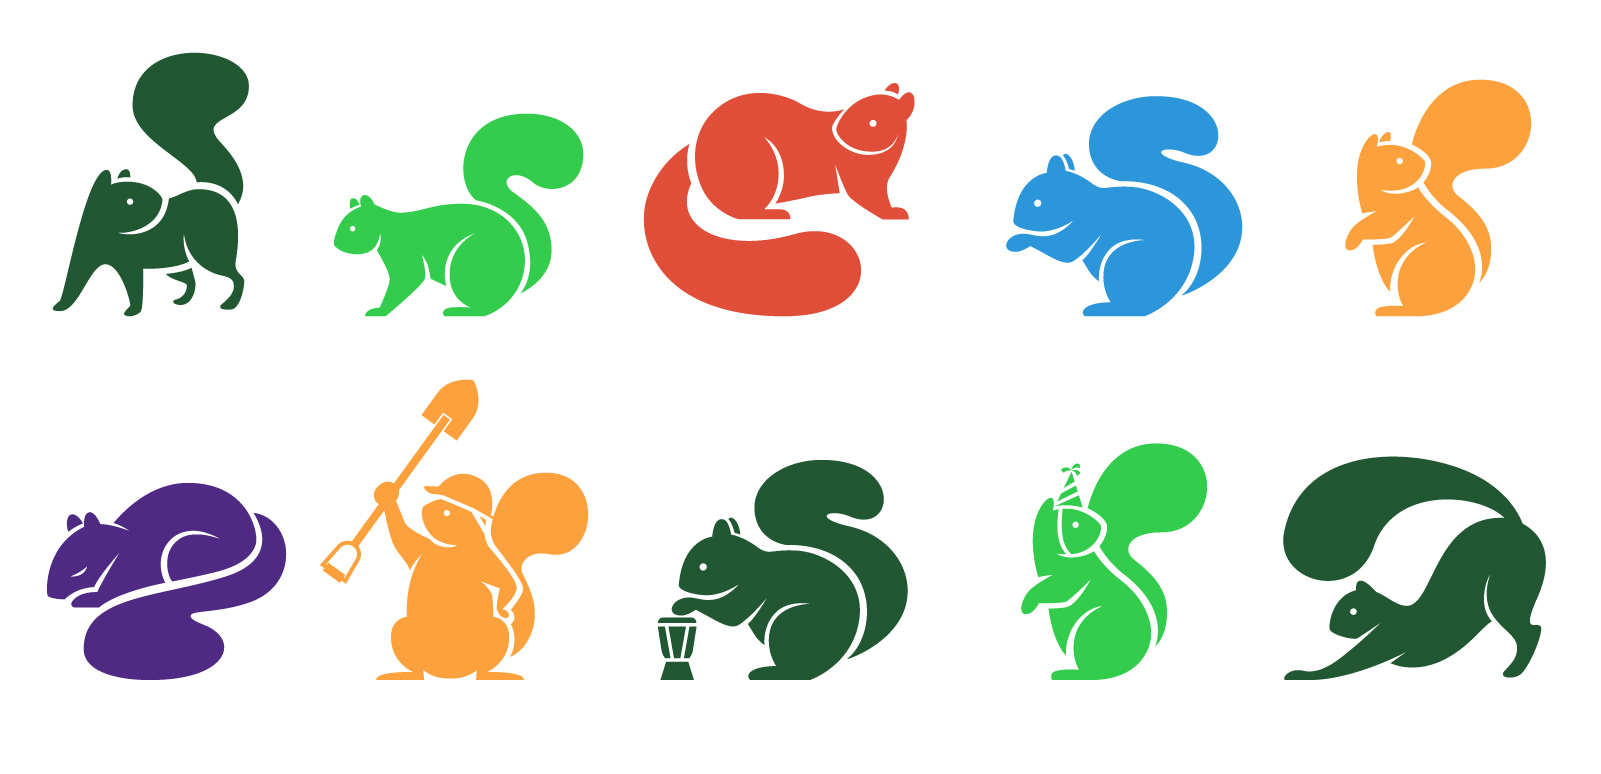 pease park squirrel illustrations in various colors